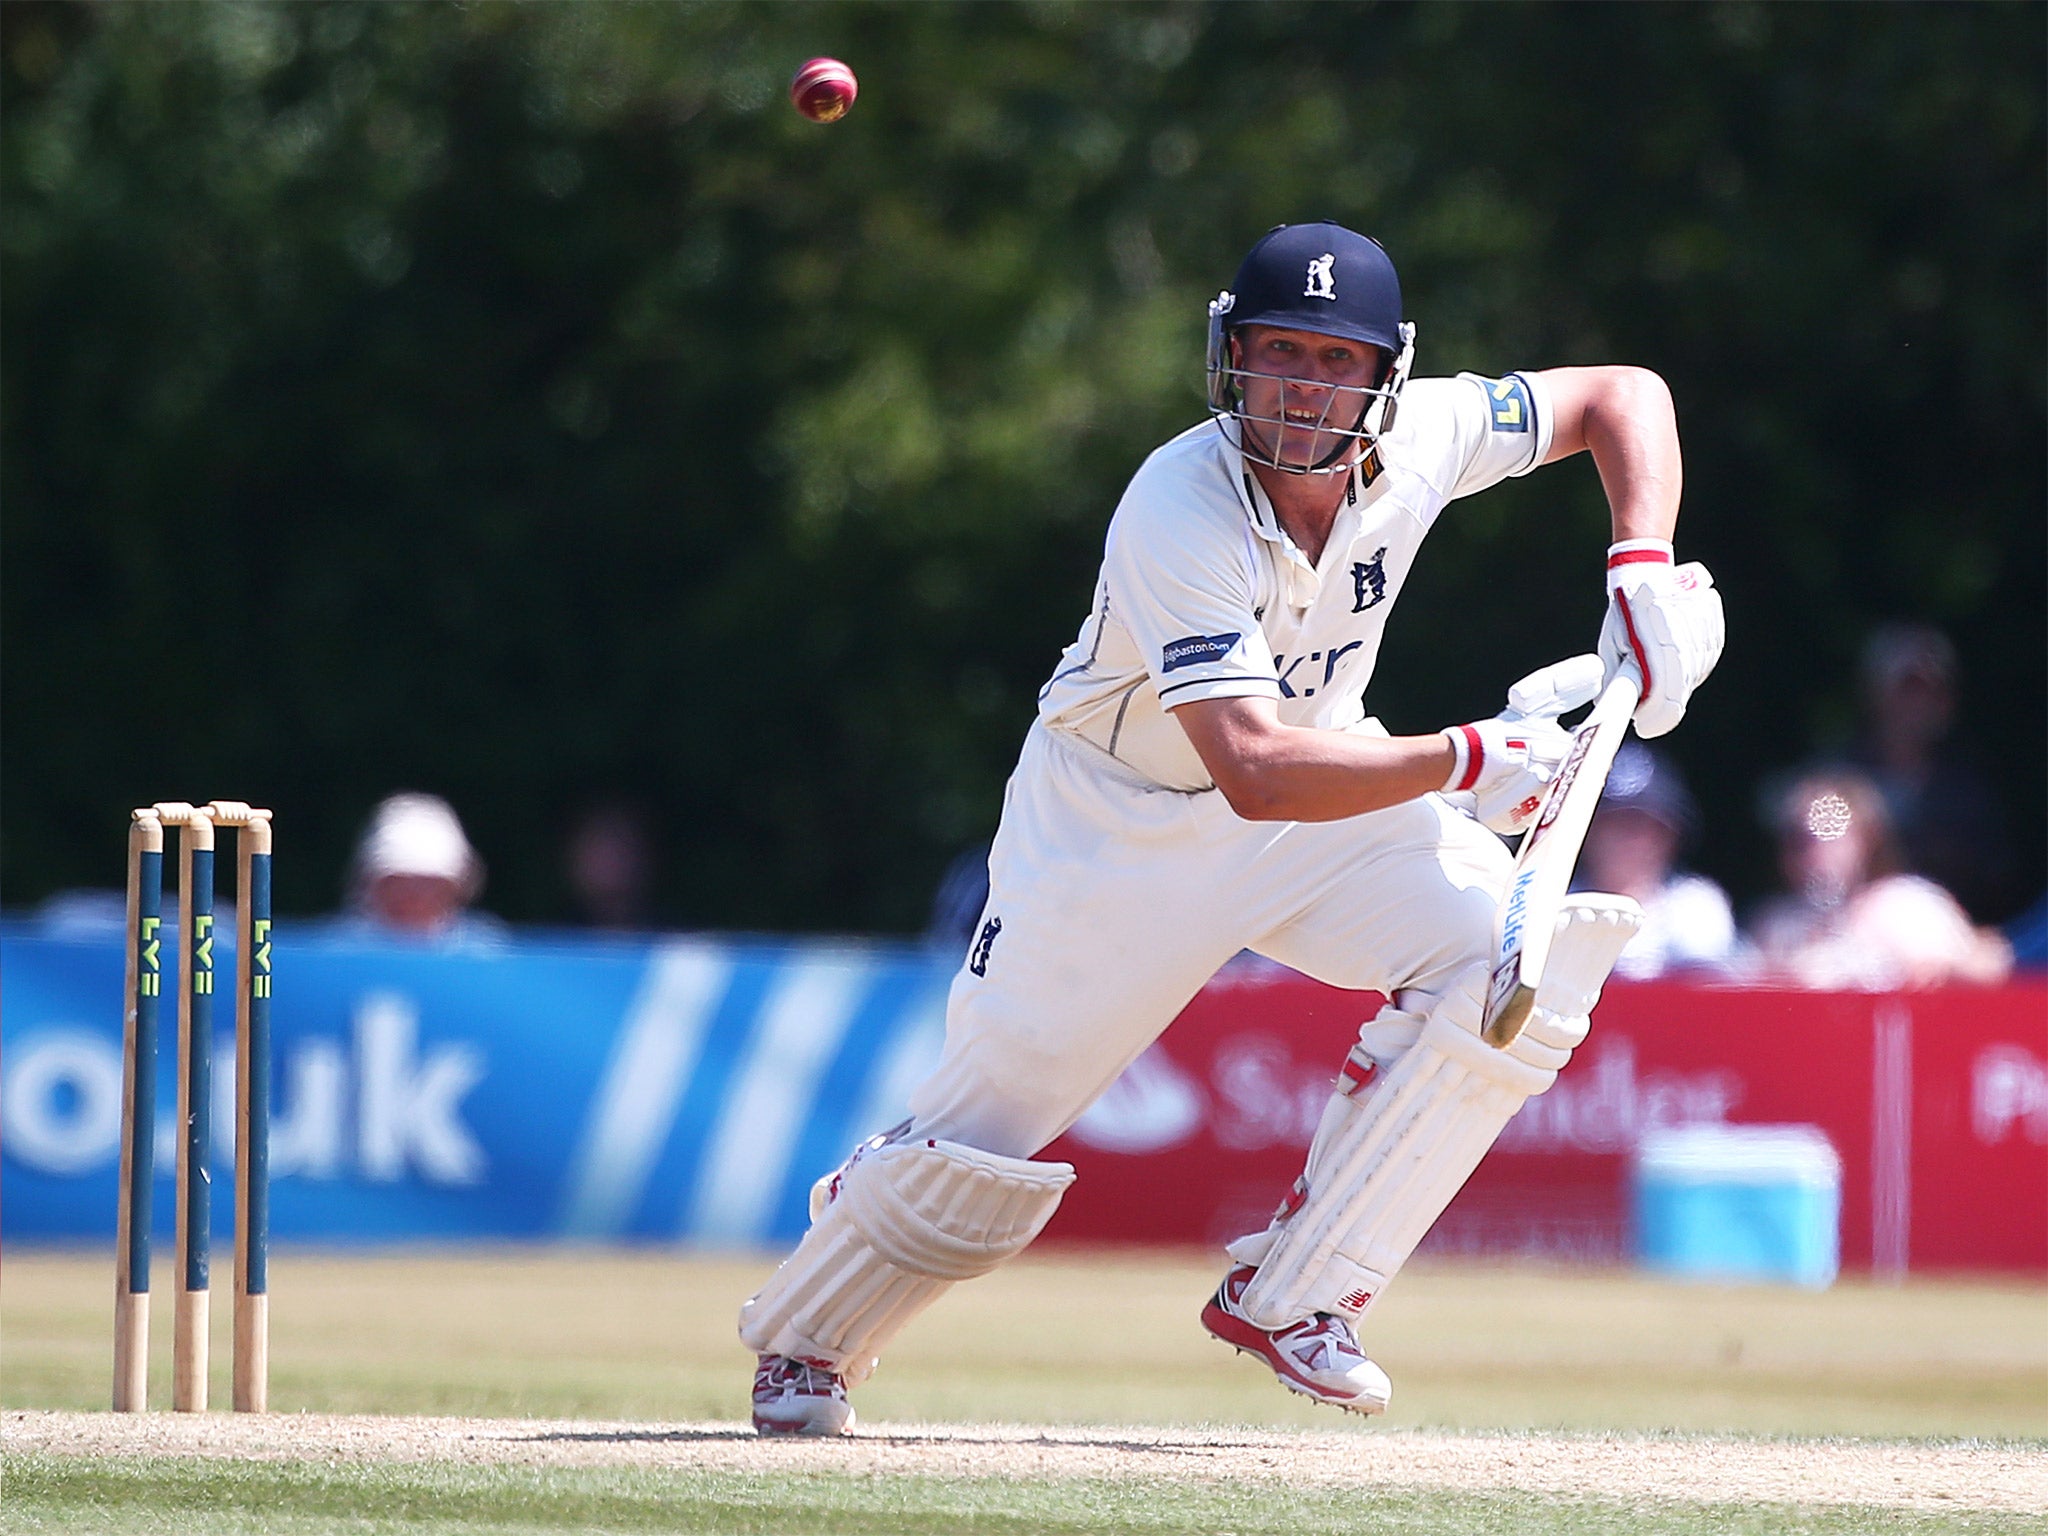 Jonathan Trott plays a shot during a match against Sussex in July (Getty)